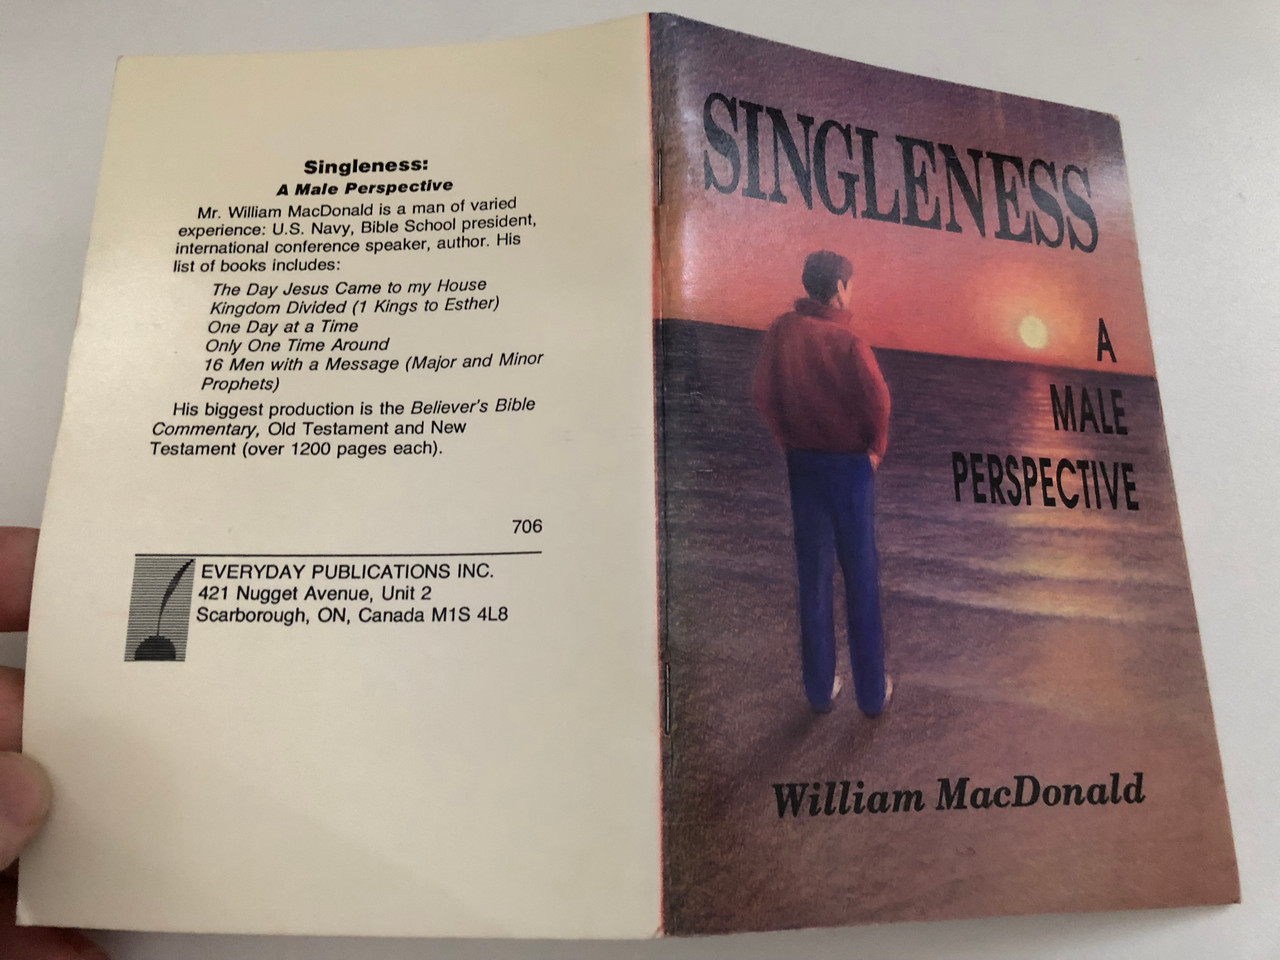 SINGLENESS_A_MALE_PERSPECTIVE_by_William_MacDonald_EVERYDAY_PUBLICATIONS_INC._Scripture_quotations_are_from_the_NEW_KING_JAMES_VERSION_of_the_Bible_1__06359.1690594559.1280.1280.JPG (1280×960)